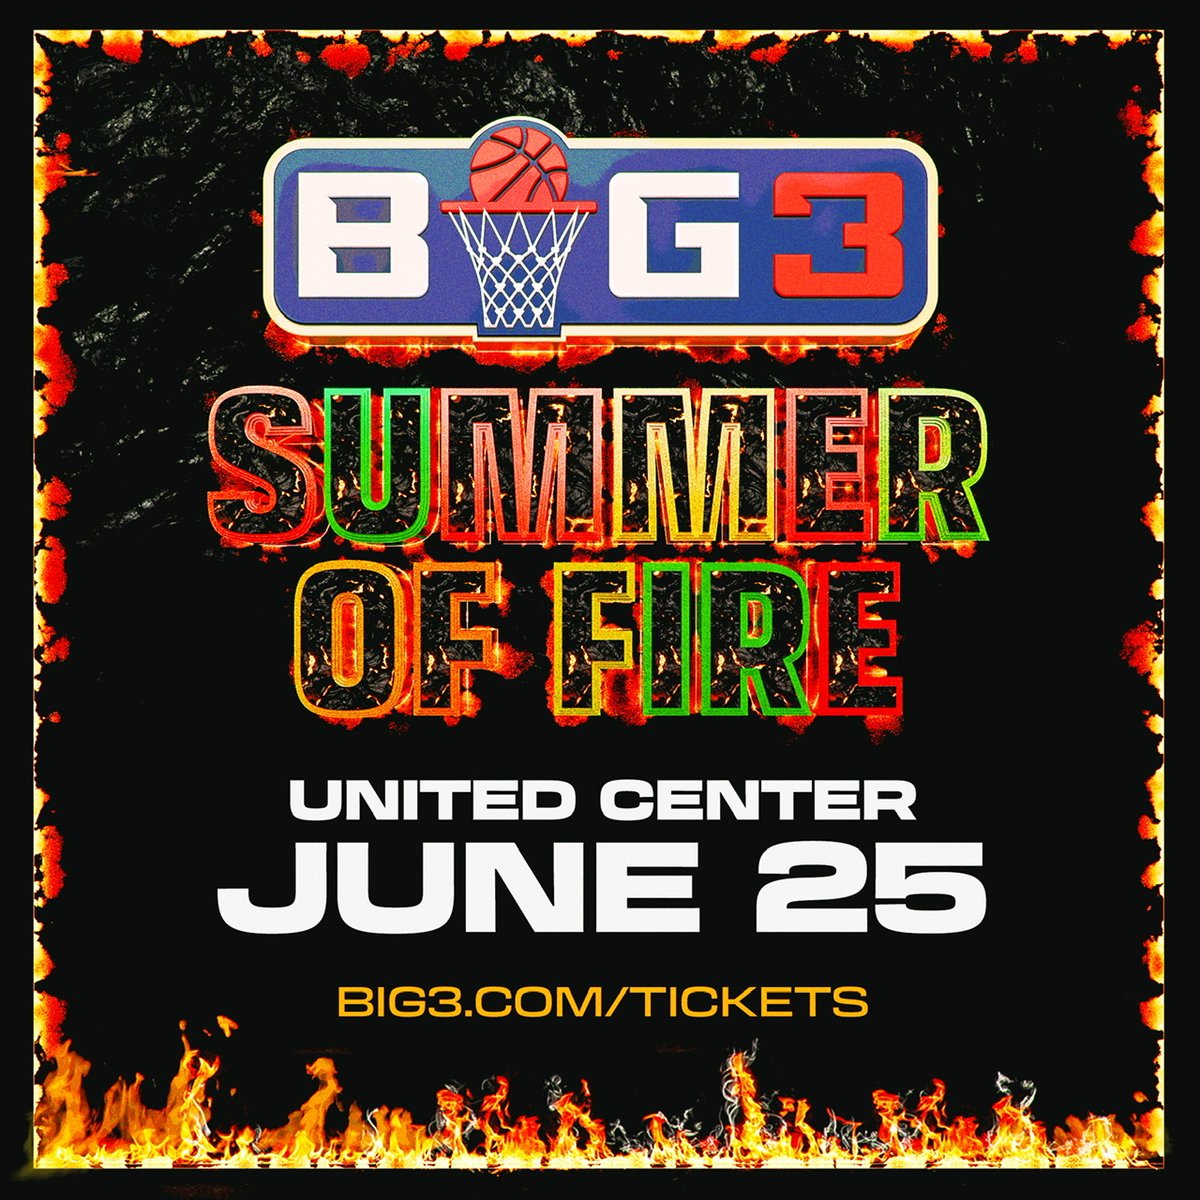 Let the countdown to Chicago begin! Who’s ready for the #SummerofFire to heat up Chi-Town in only three days? Get your tickets at big3.com/tickets before they sell out.